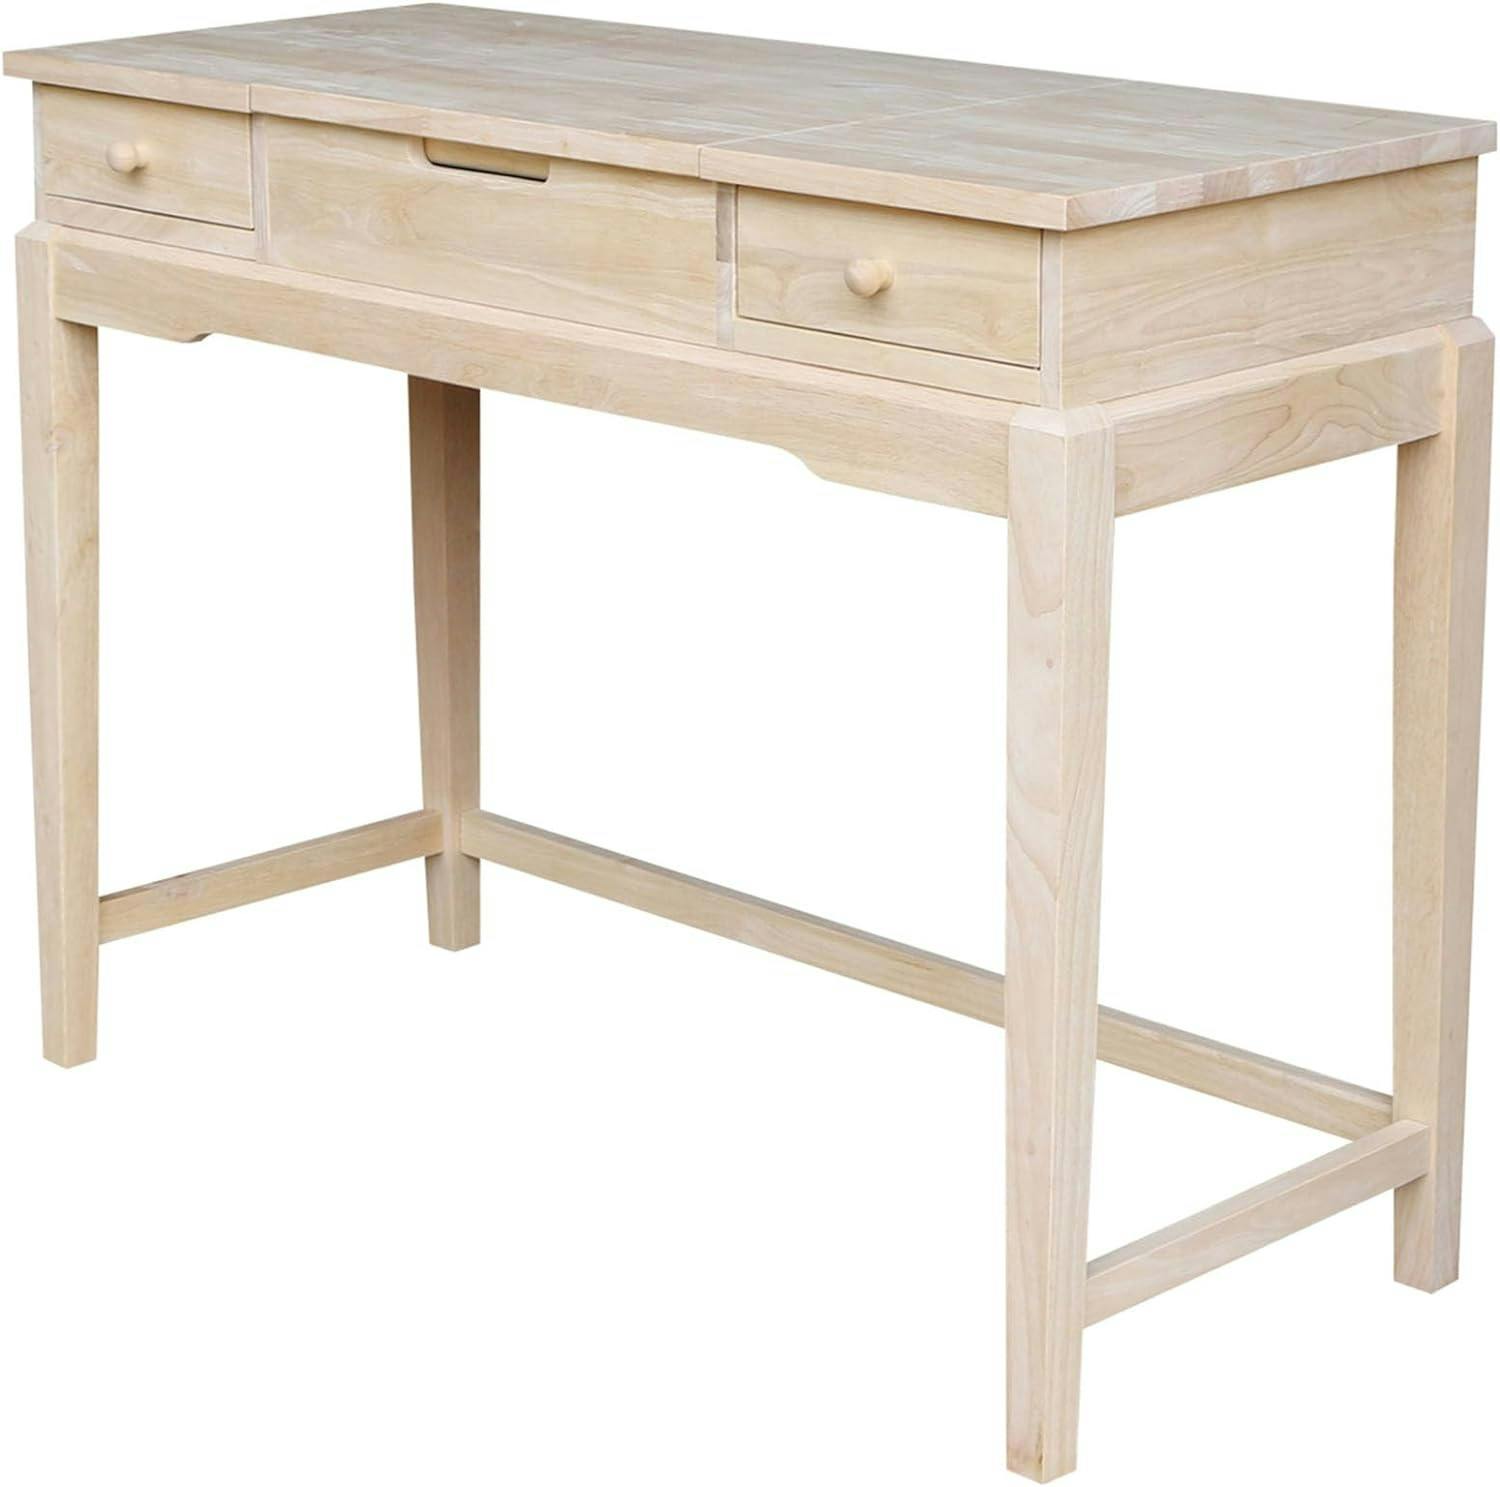 Elegant Unfinished Solid Wood Vanity Table with Microfiber Bench